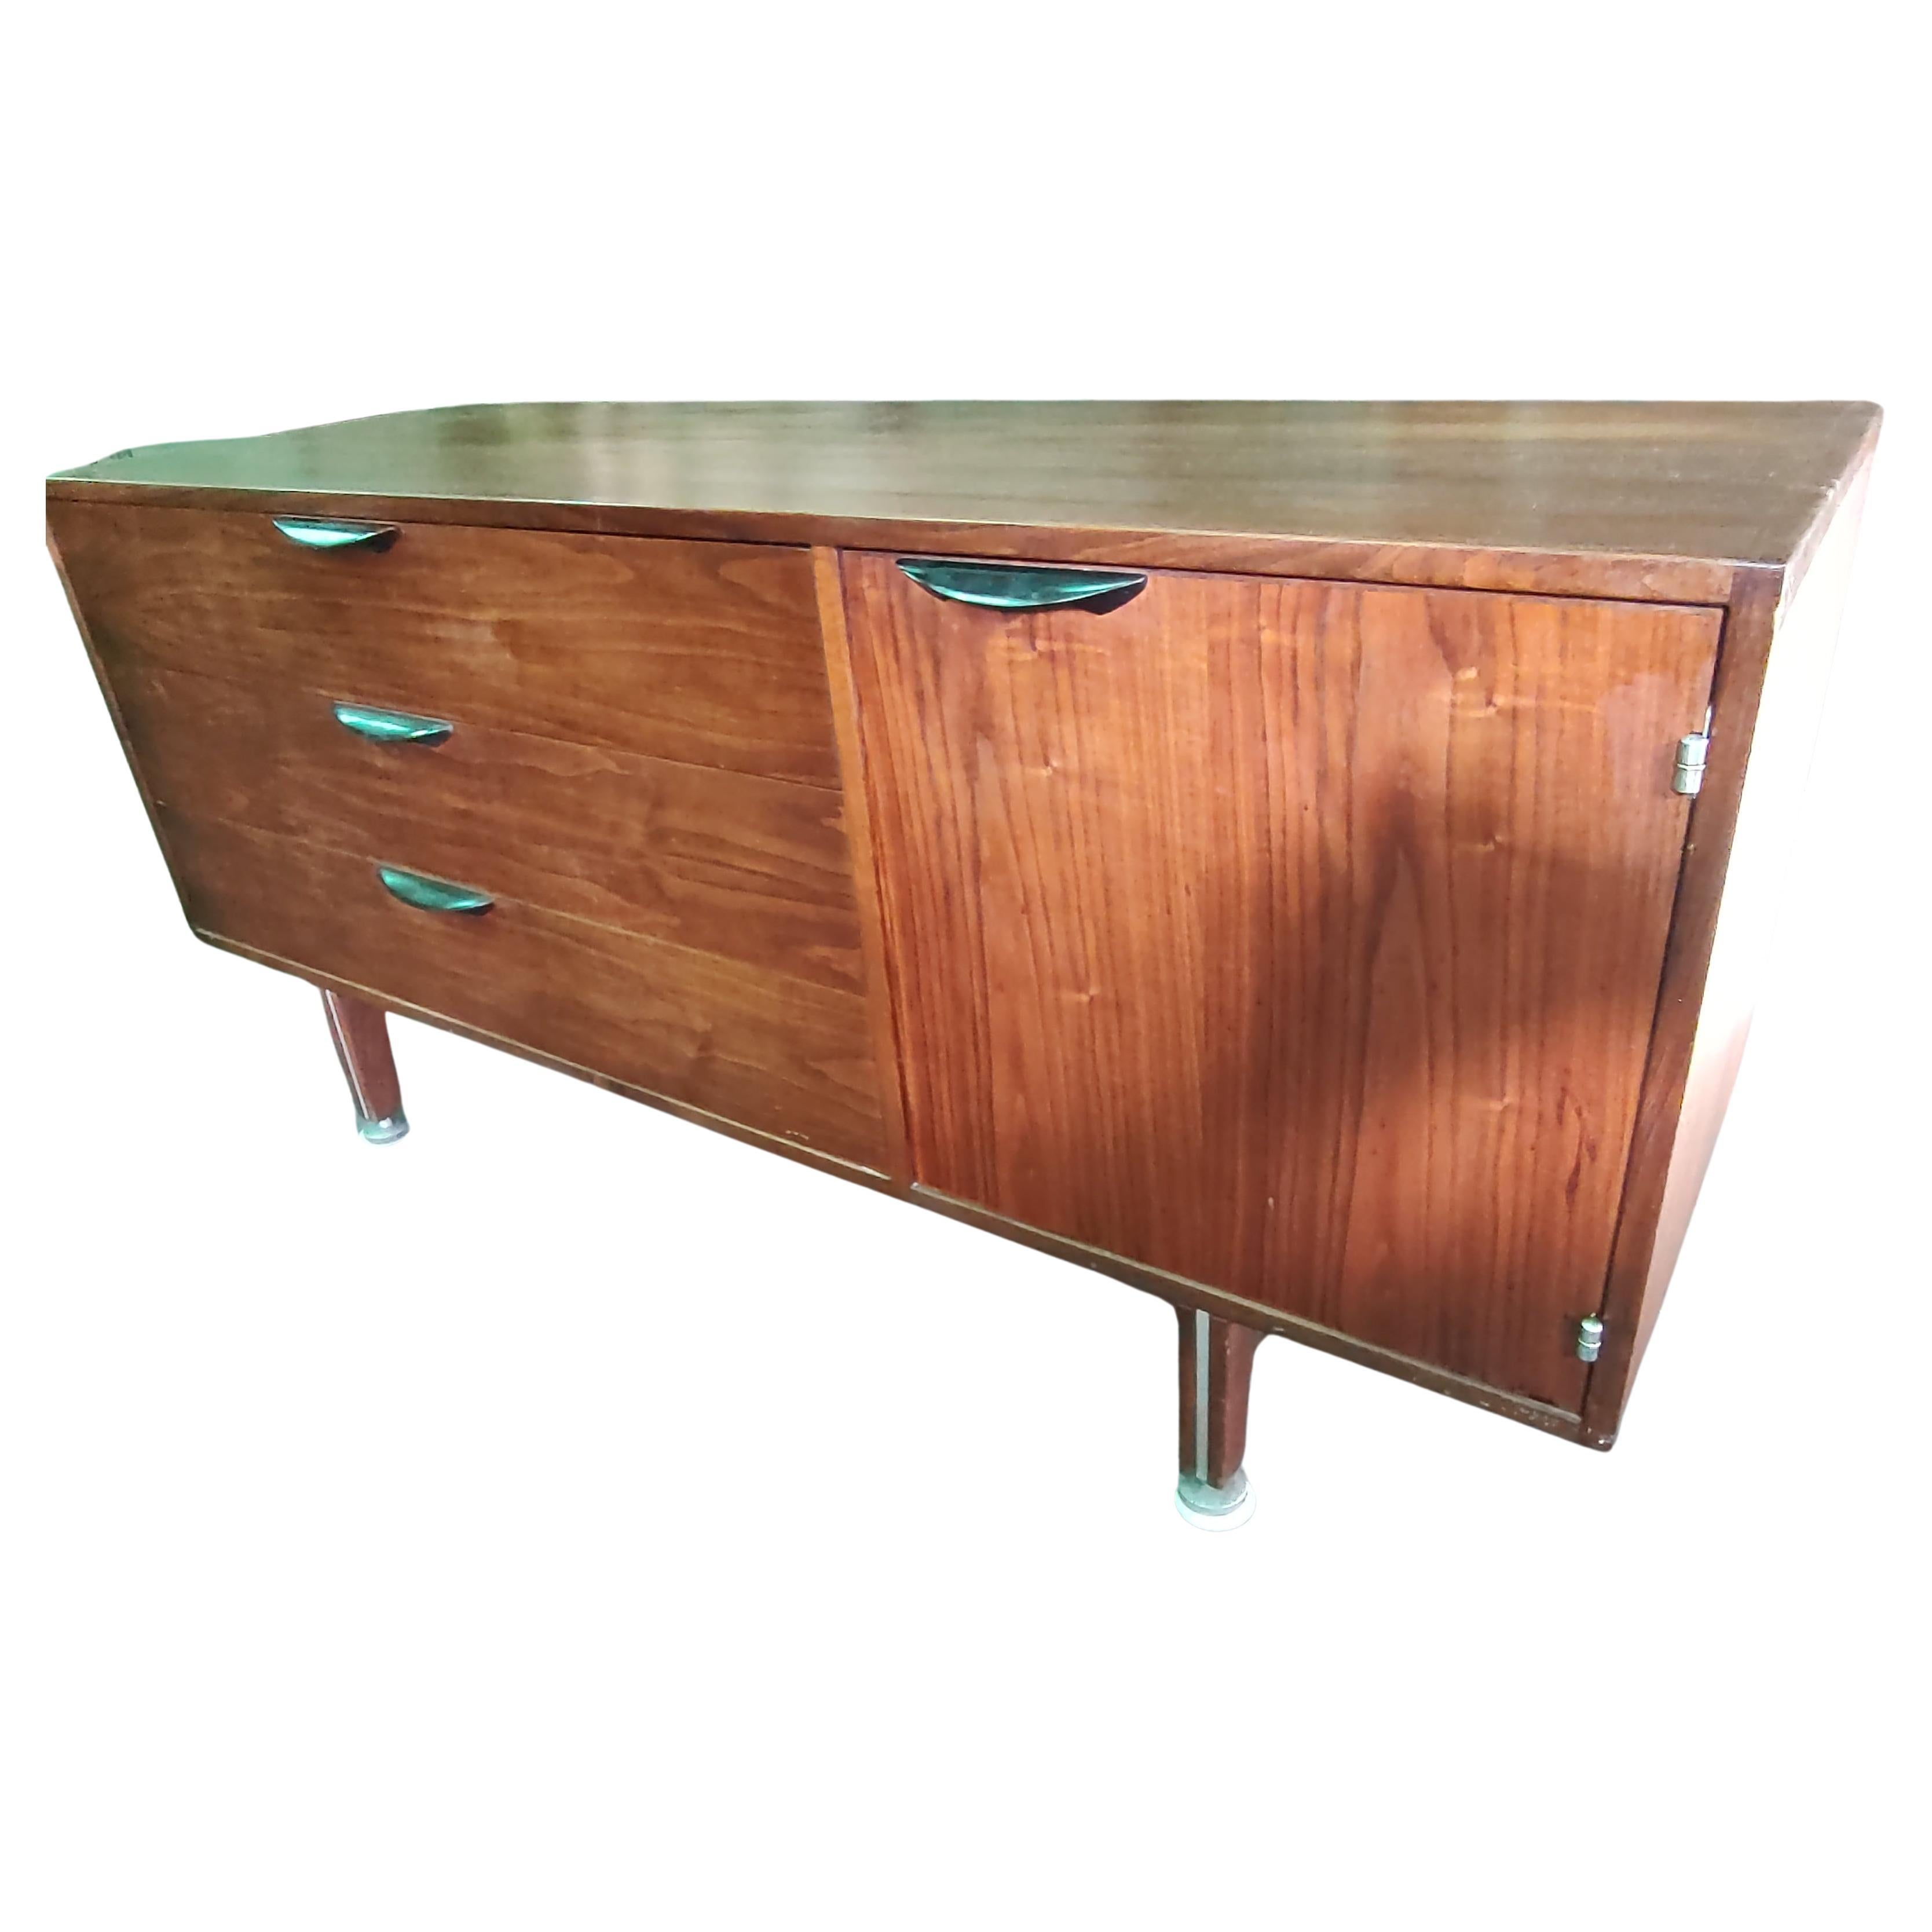 Fabulous Mid-Century Modern credenza by Jen's Risom. 3 drawers beside a cabinet door with 1 shelf. Solid Walnut with a finished back. Aluminum hardware with inlay in the legs. Oak secondary woods for the drawers interior. Ebonized sculpted metal